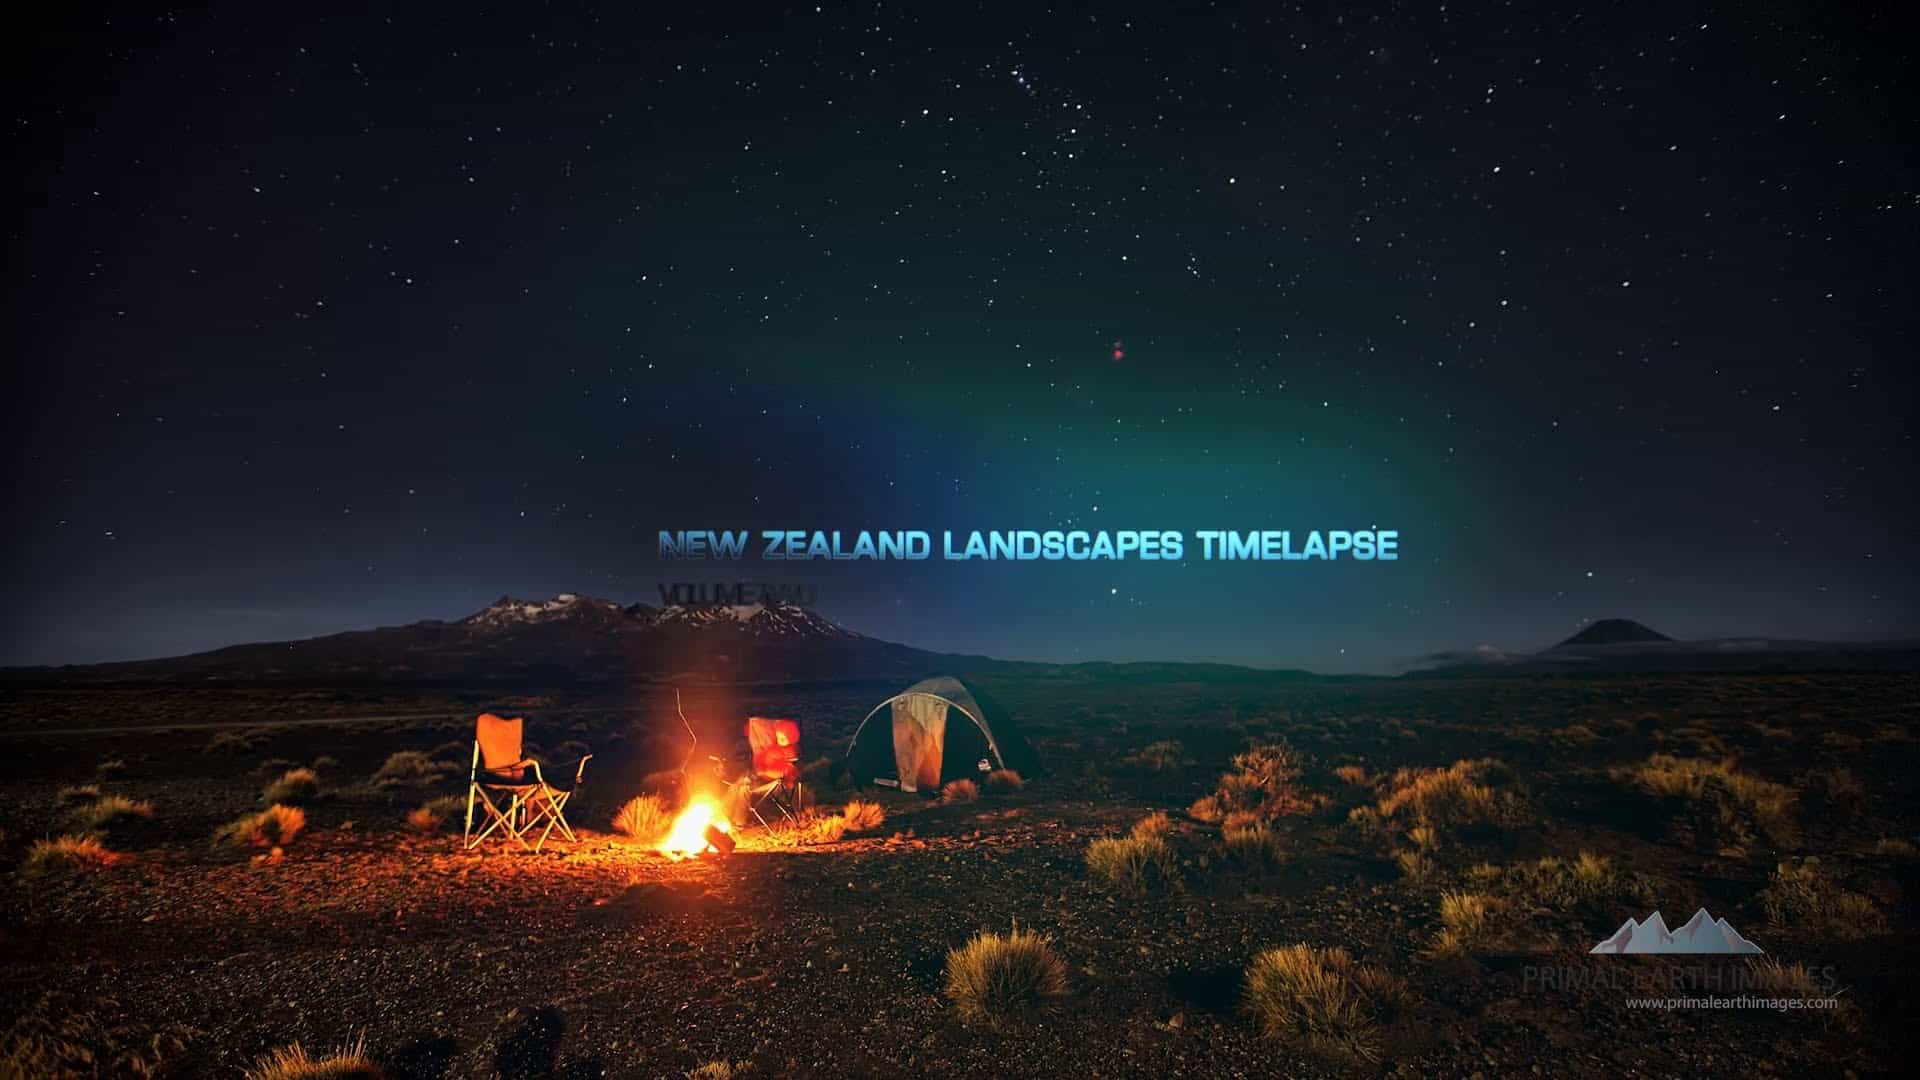 "Timelapse" Video cover image